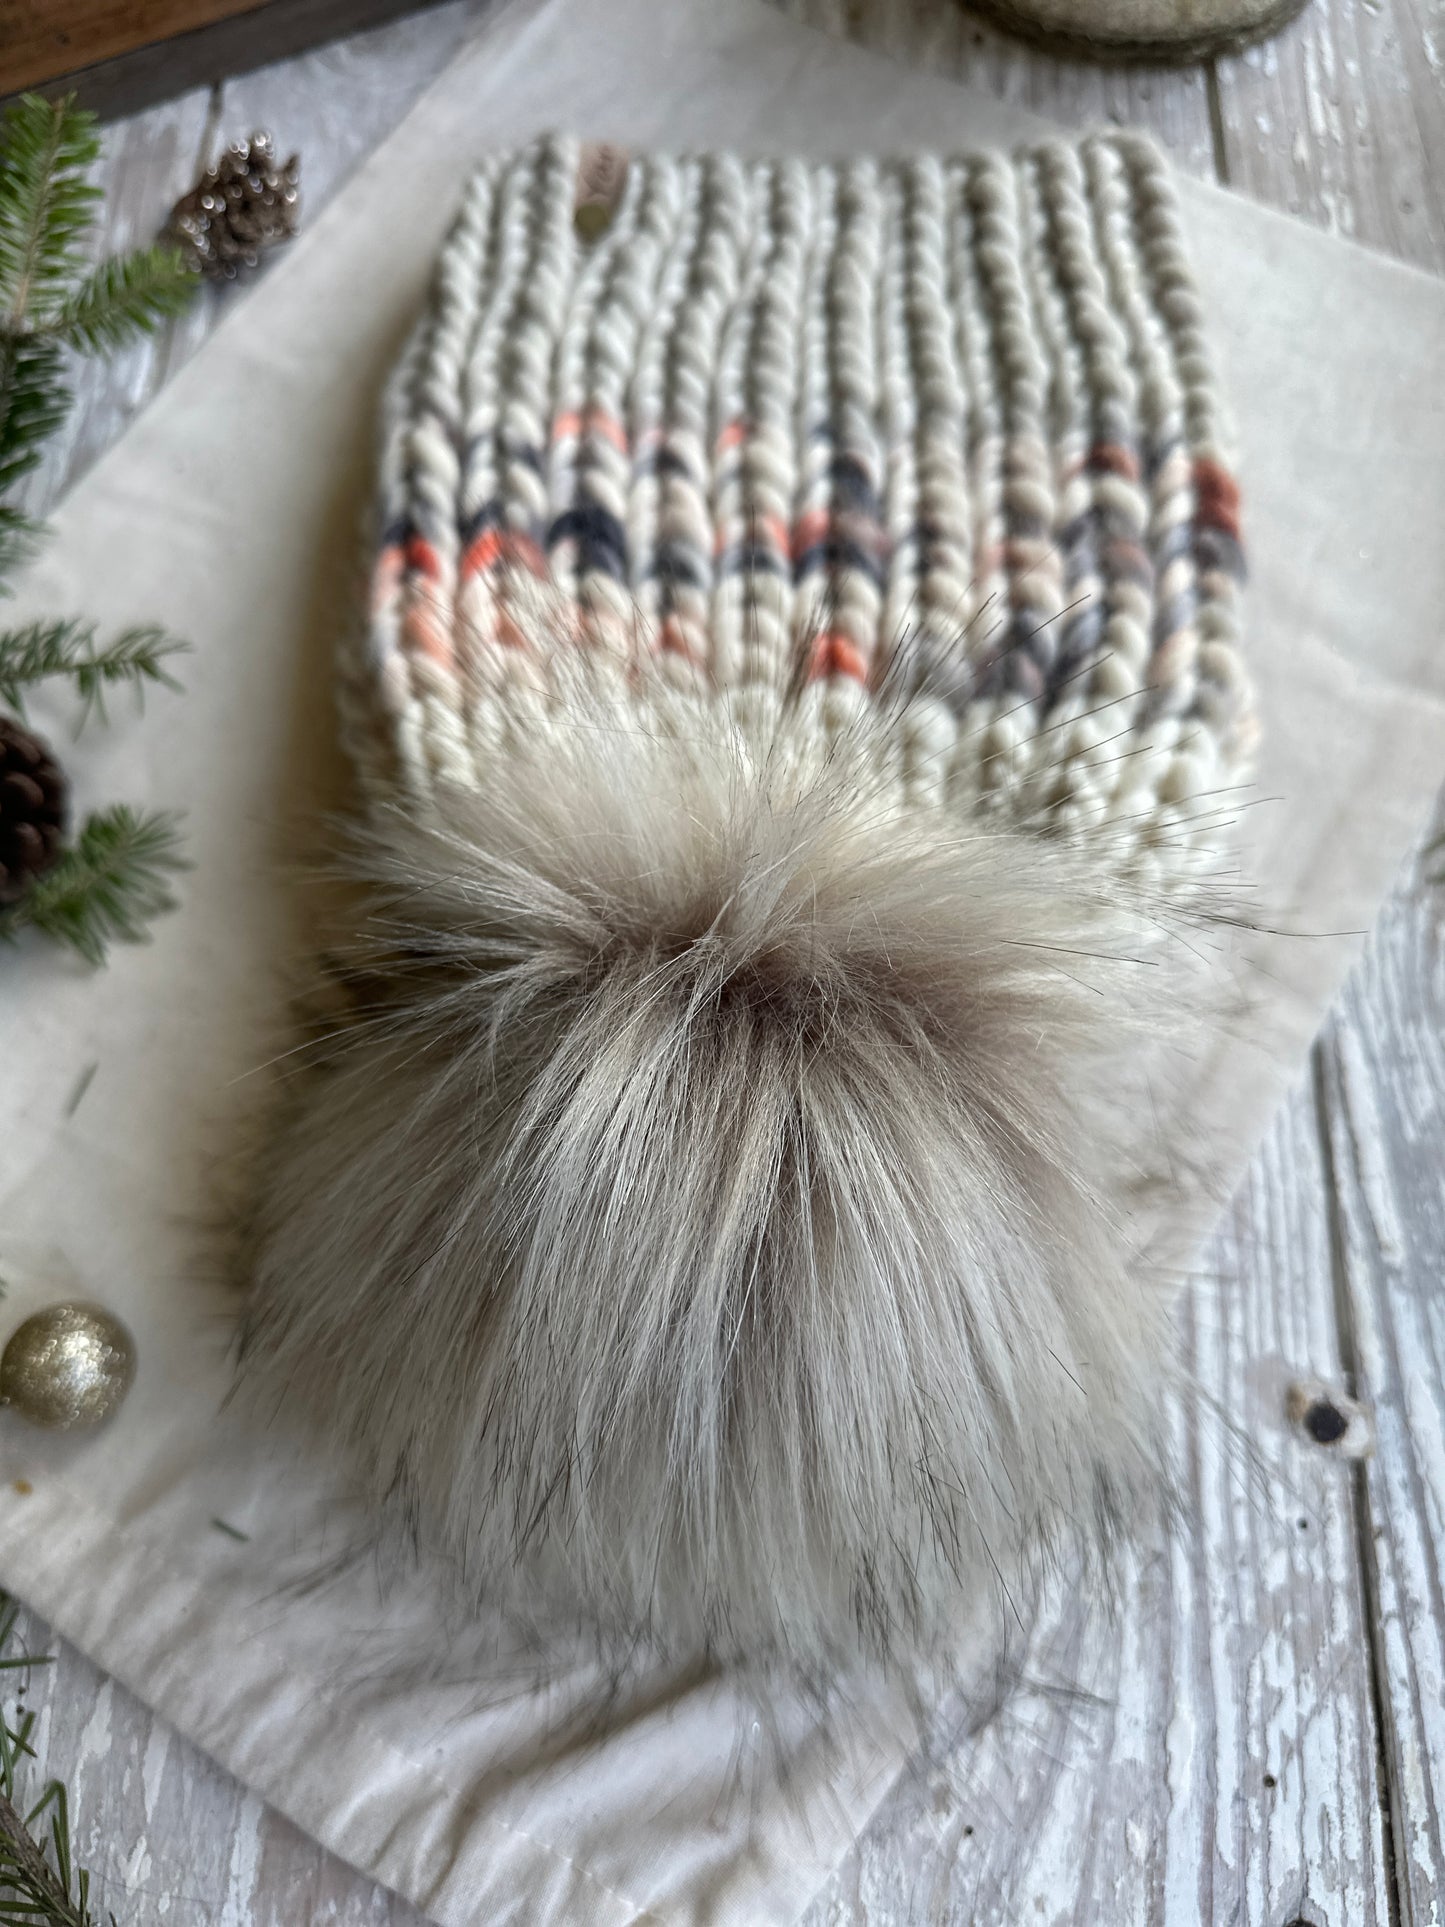 Merino and Peruvian Wool knit hat with faux fur Pom